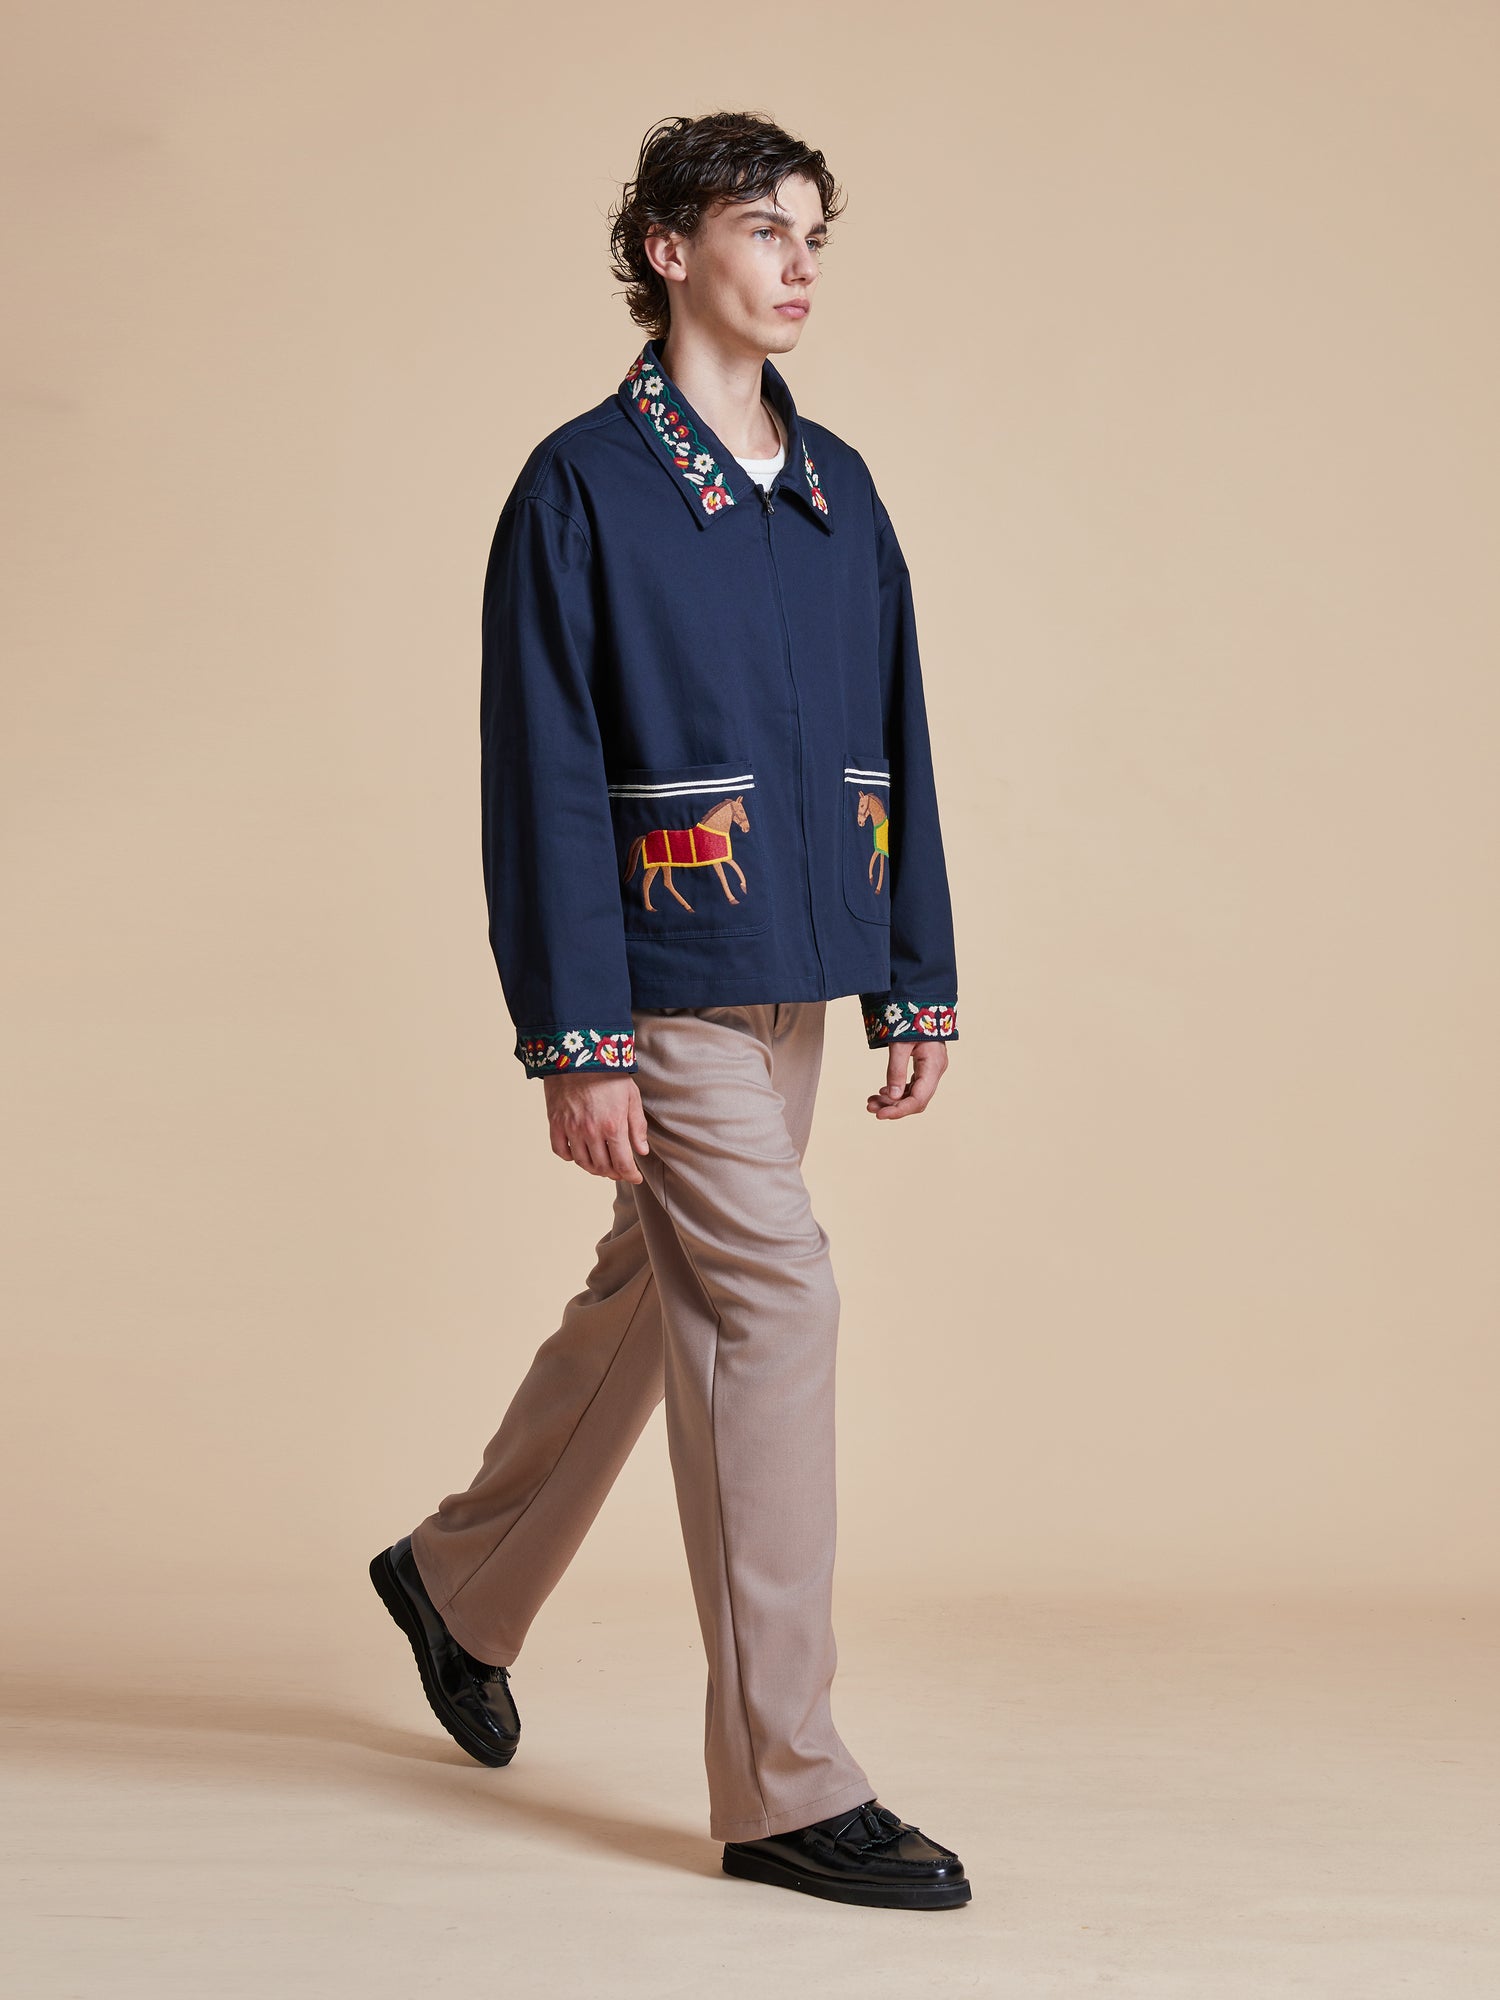 The model is wearing a Found Horse Equine Work Jacket and tan pants.